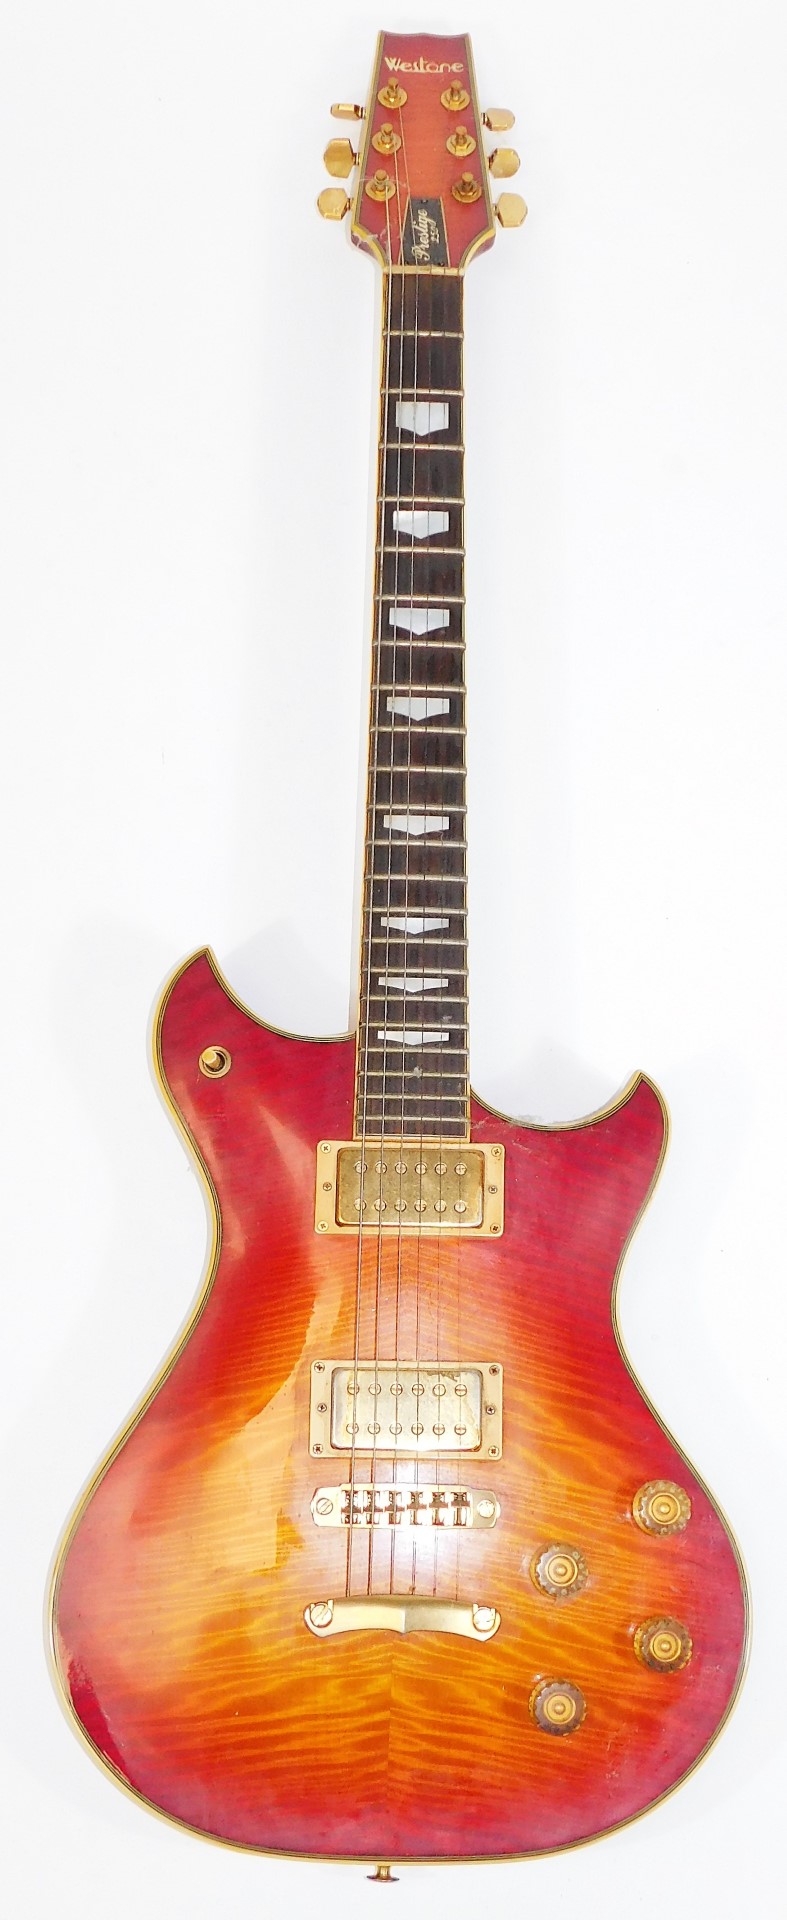 A Westone Prestige 250 electric guitar, in sunburst finish, with flame two piece maple body, with - Image 2 of 5